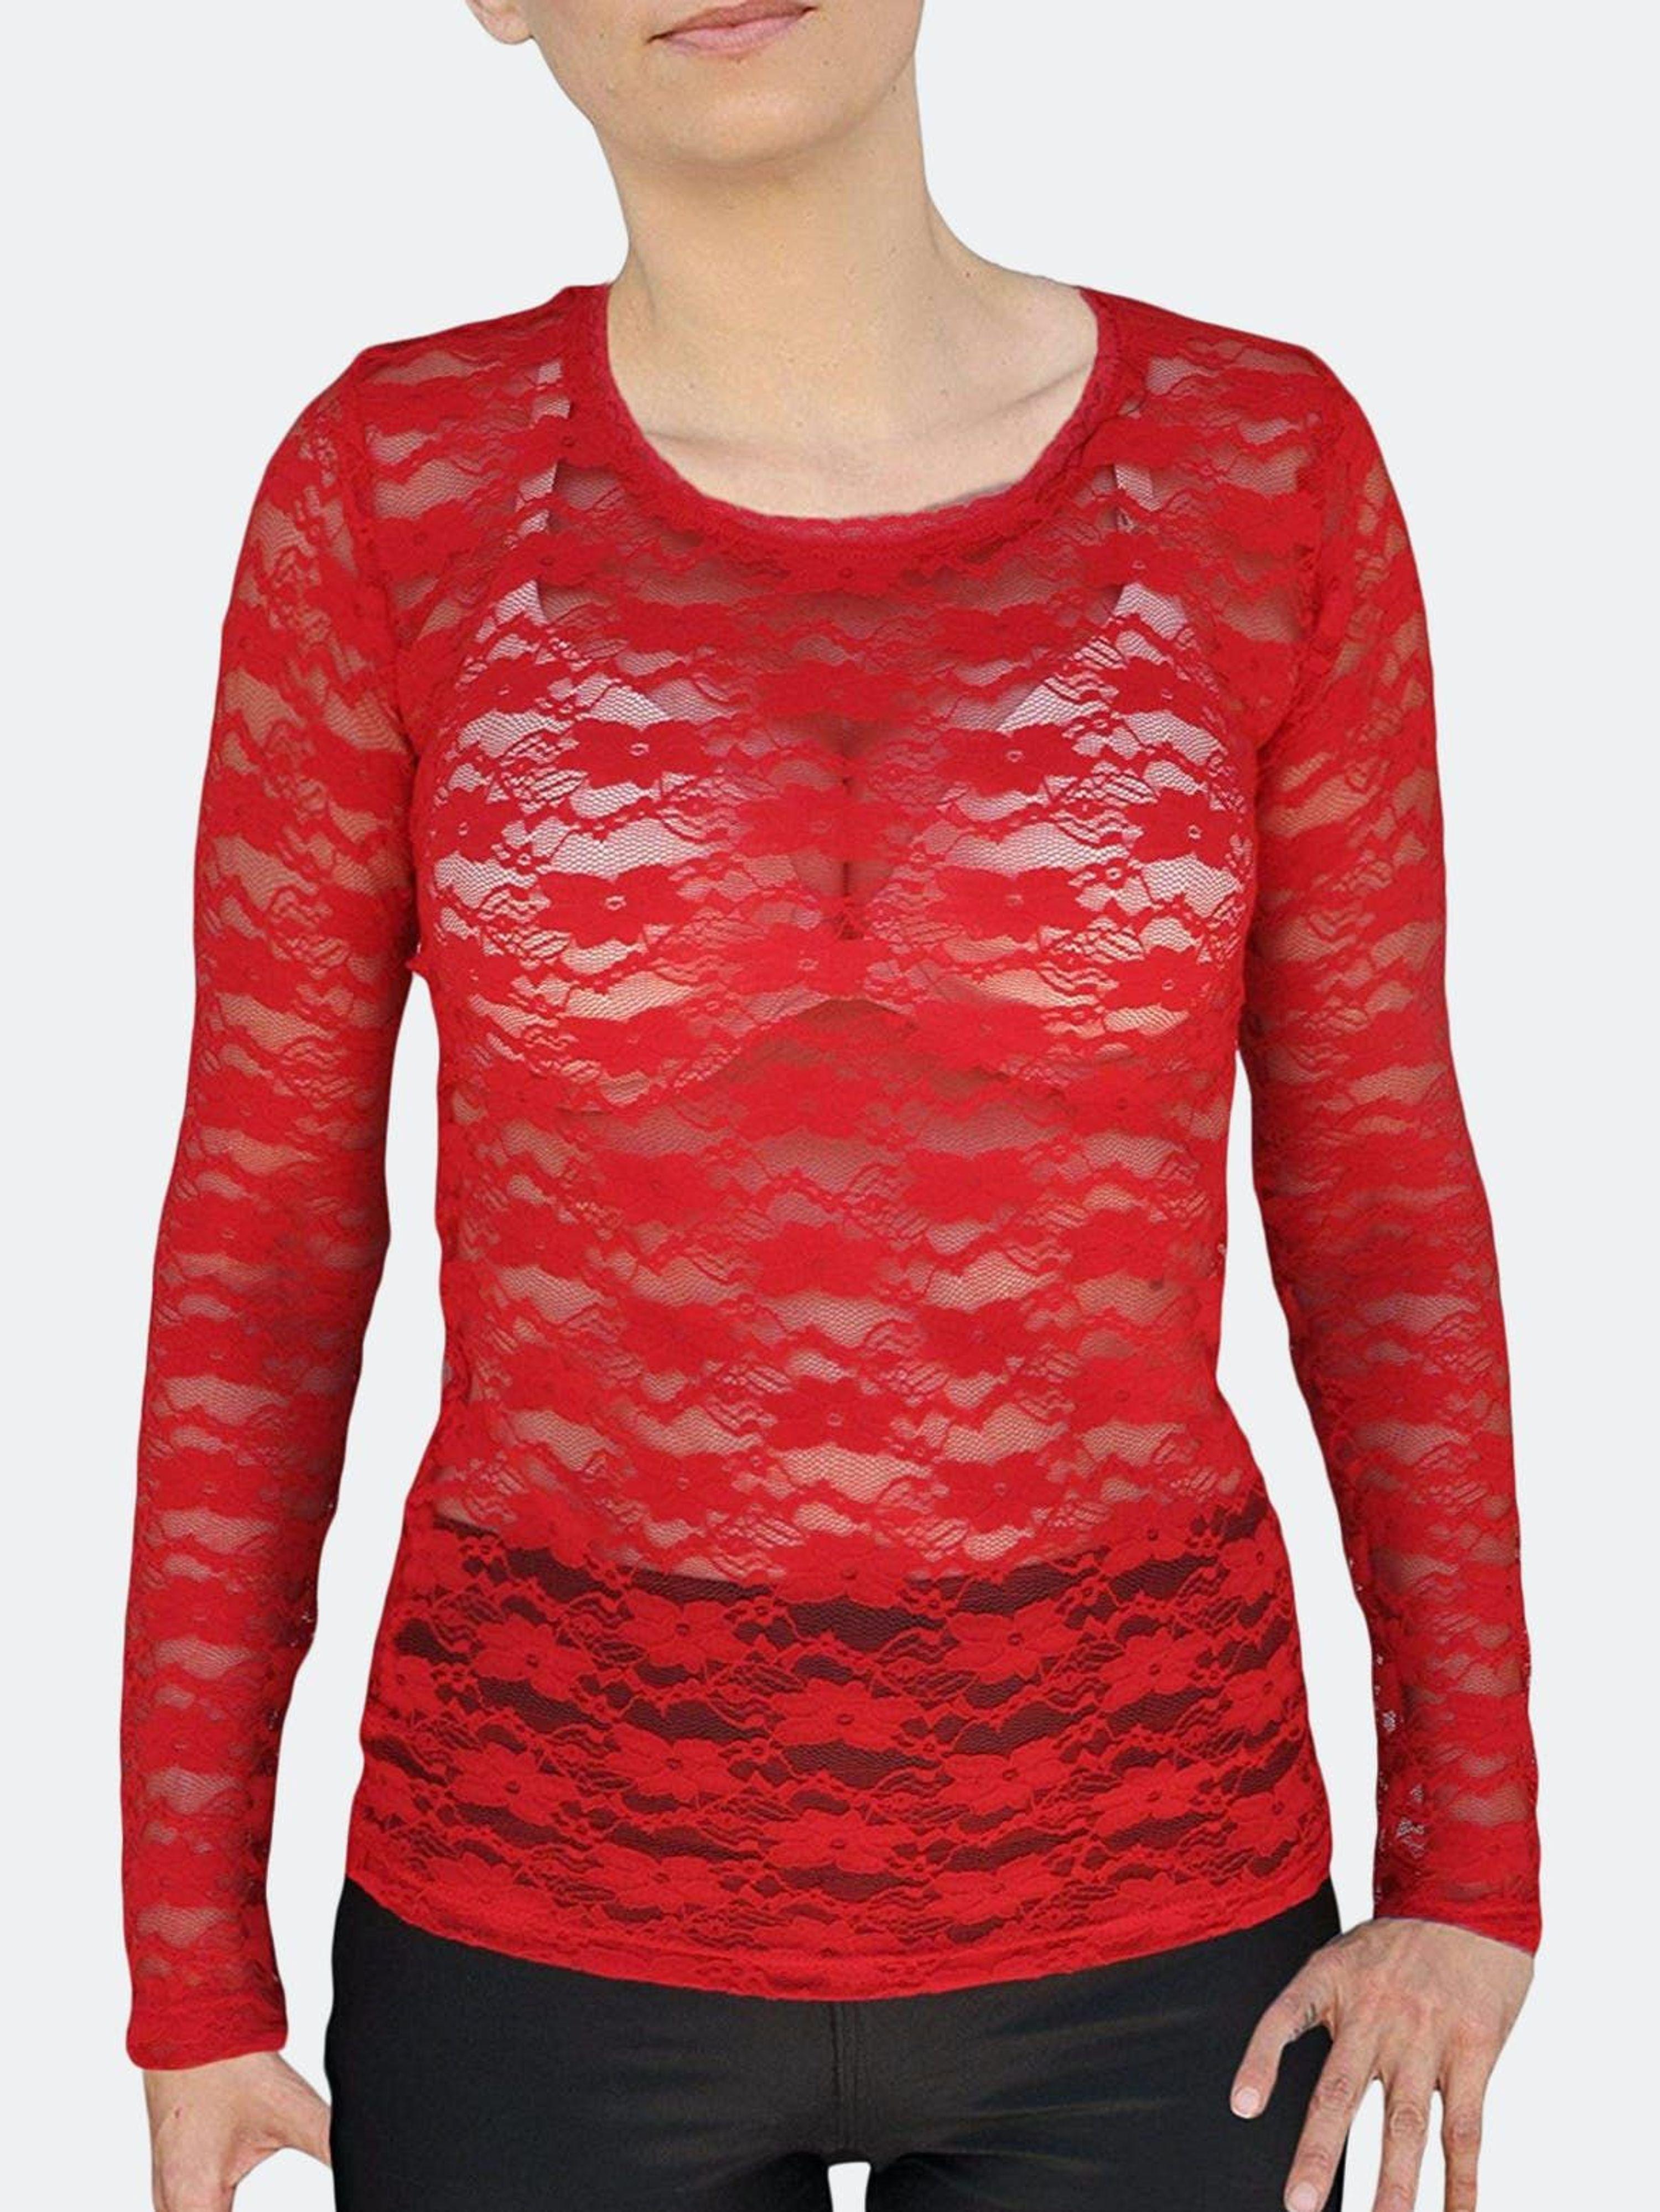 Ooh la la Usa Made Plus Size Long Sleeve Stretch Lace T Shirt Blouse Top in  Red | Lyst